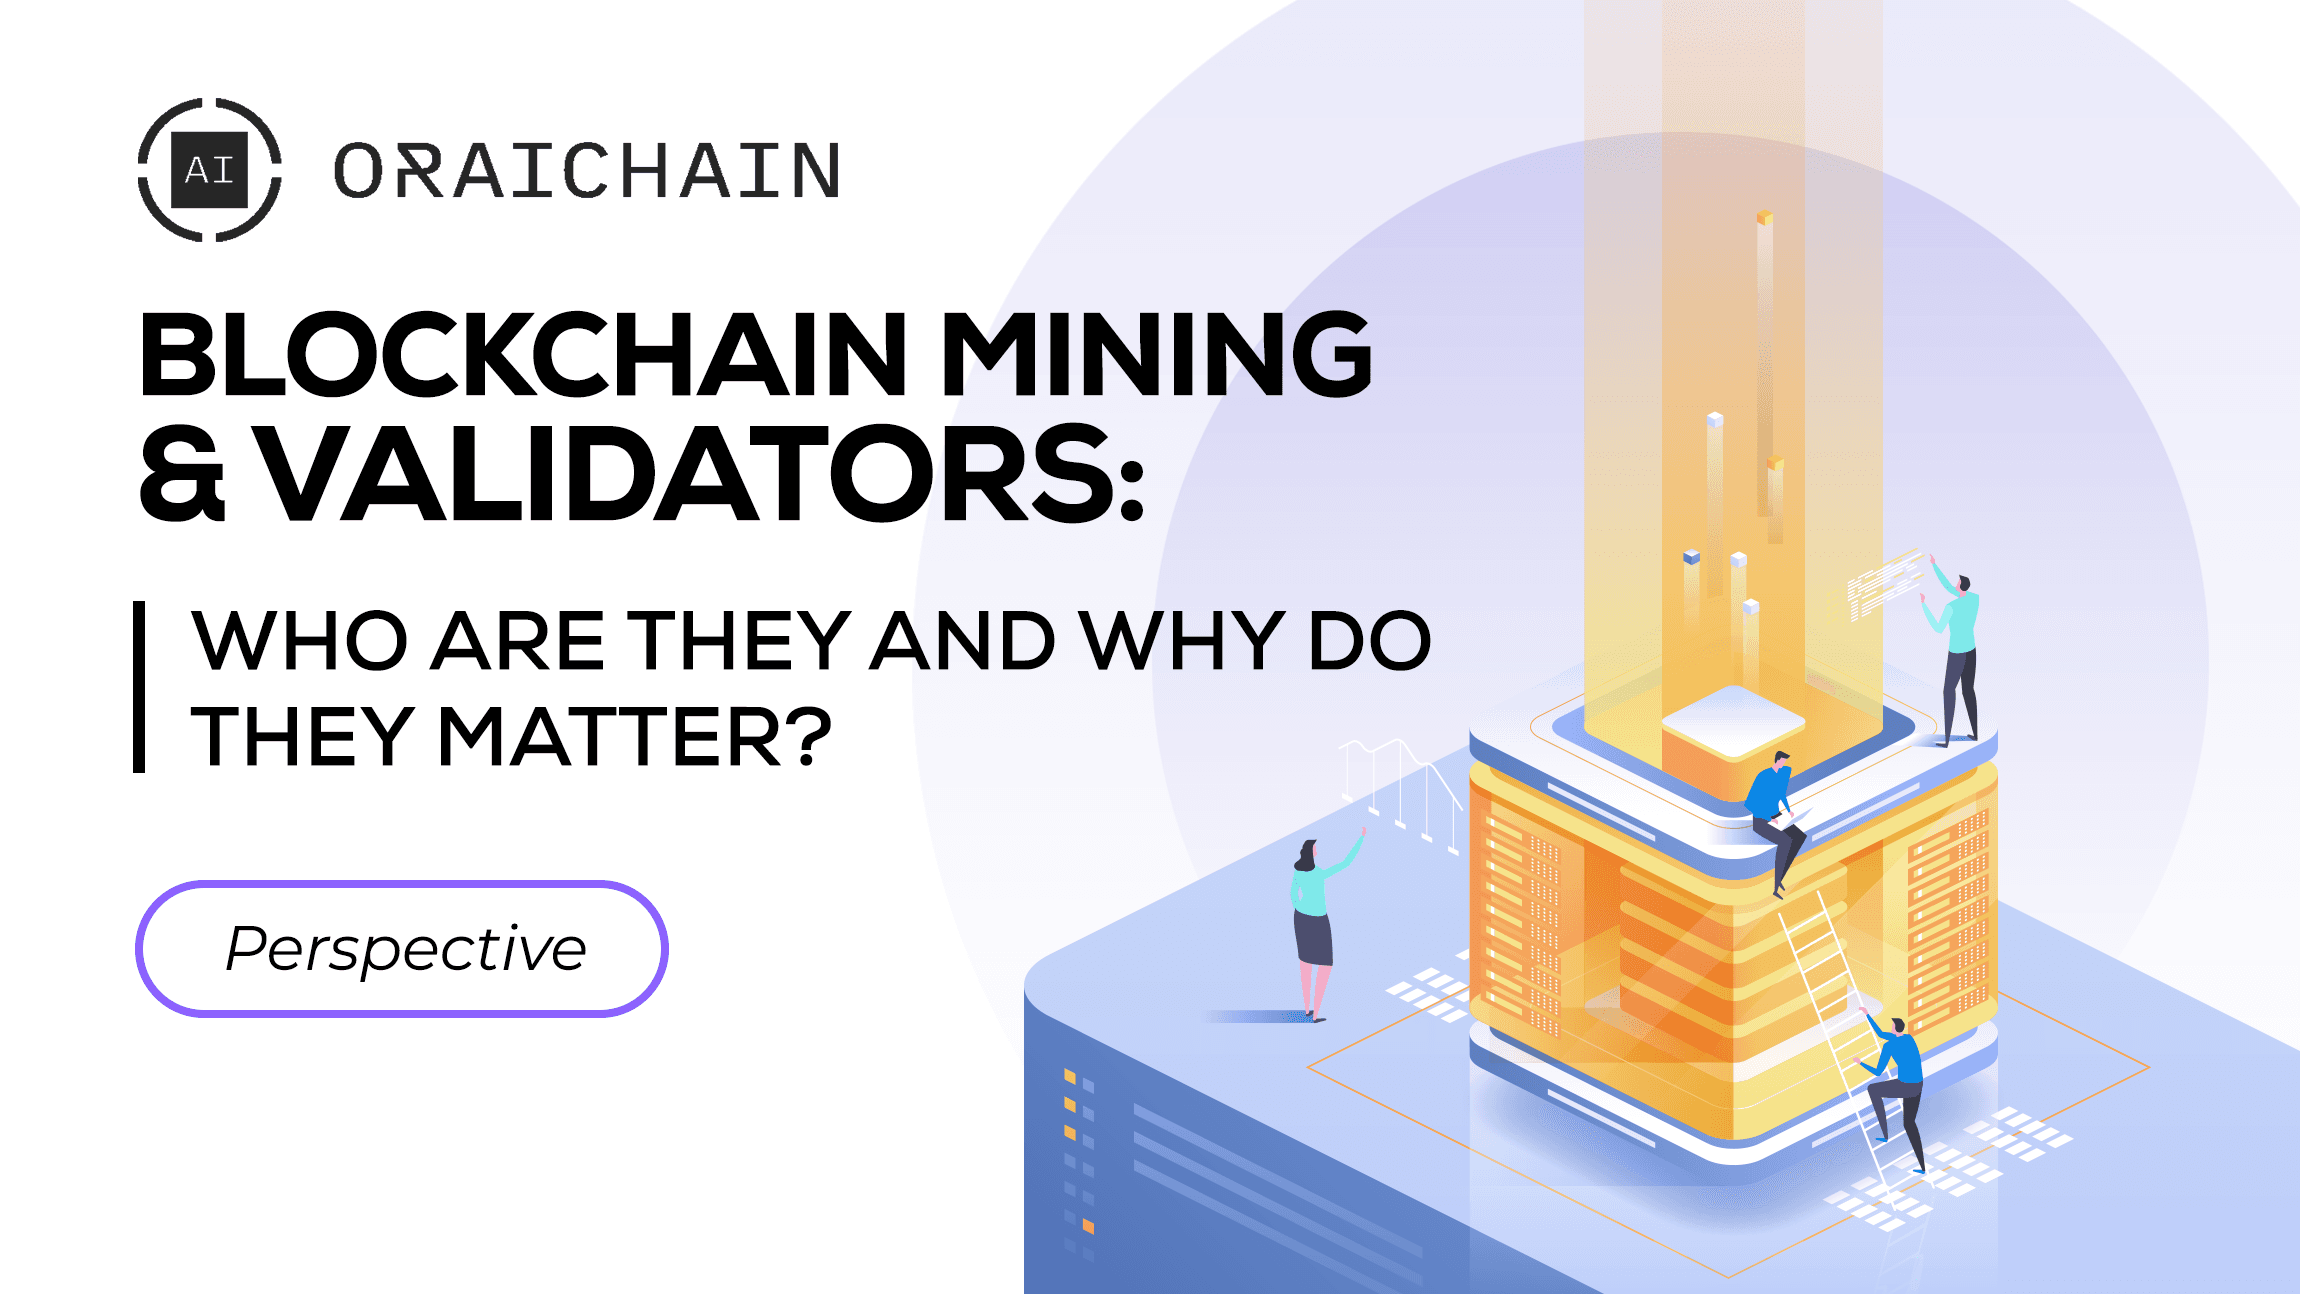 Blockchain Mining & Validators: Who are they and why do they matter?